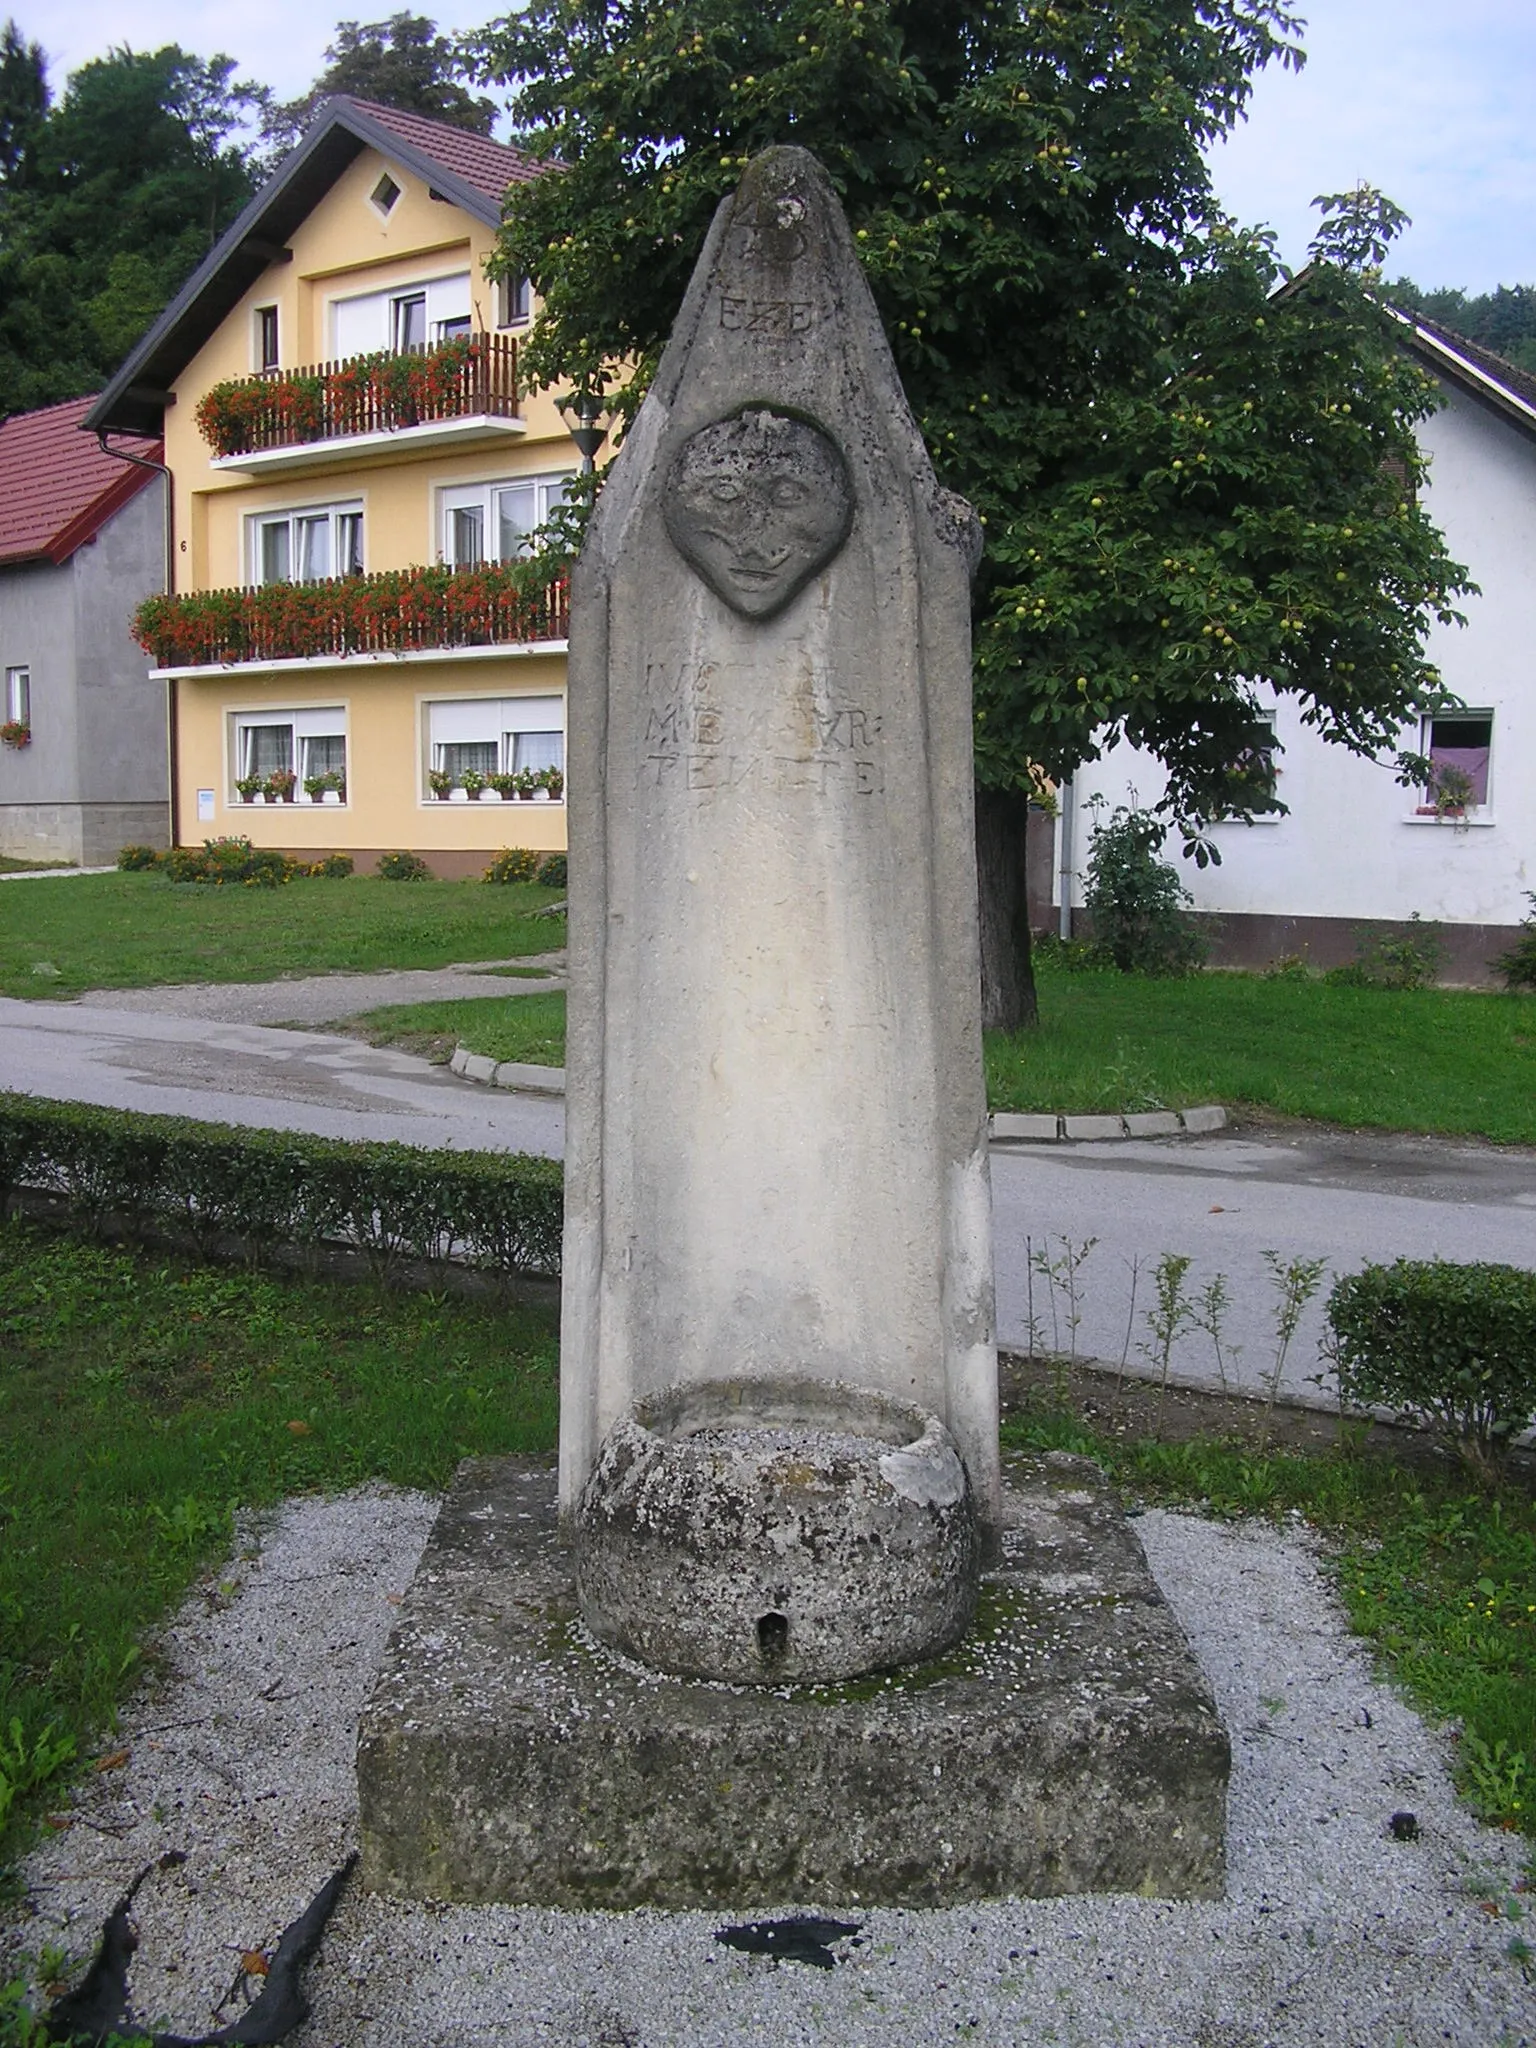 Photo showing: The pillory of shame in Vinica, Croatia